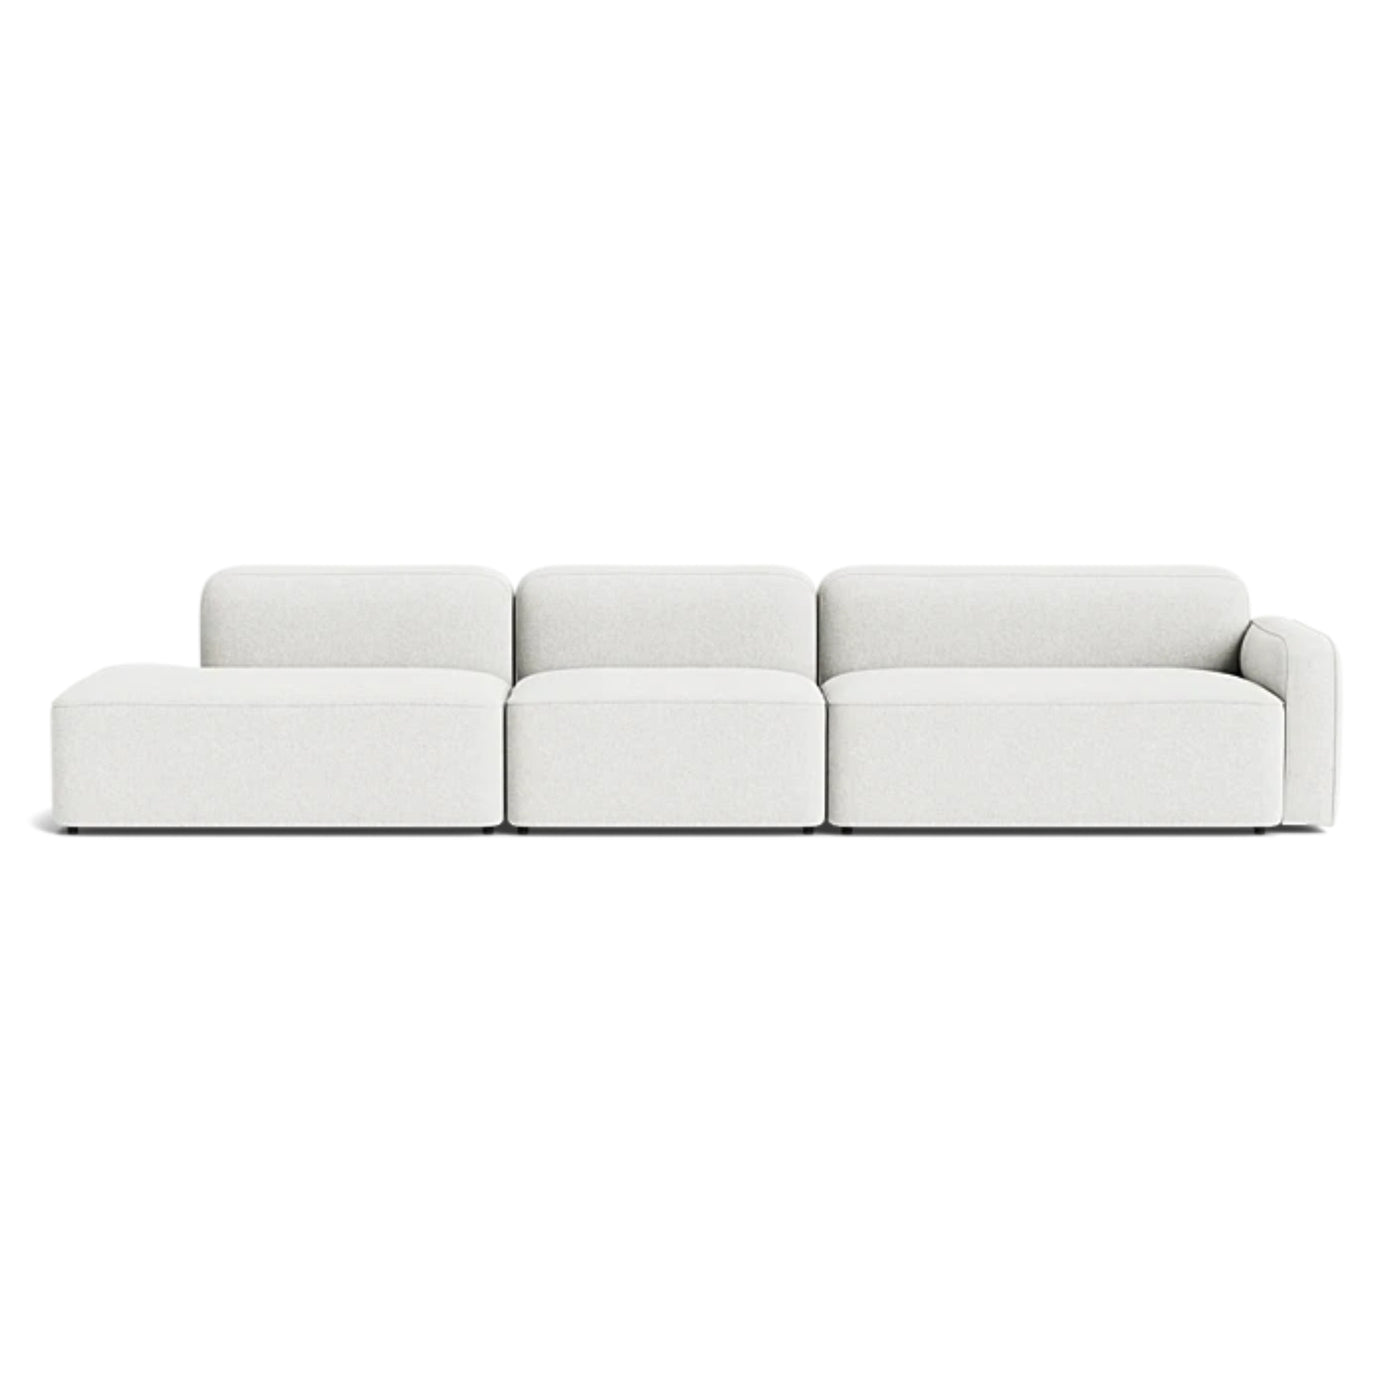 Normann Copenhagen Rope 3 Seater Modular Sofa. Made to order at someday designs. #colour_hallingdal-110